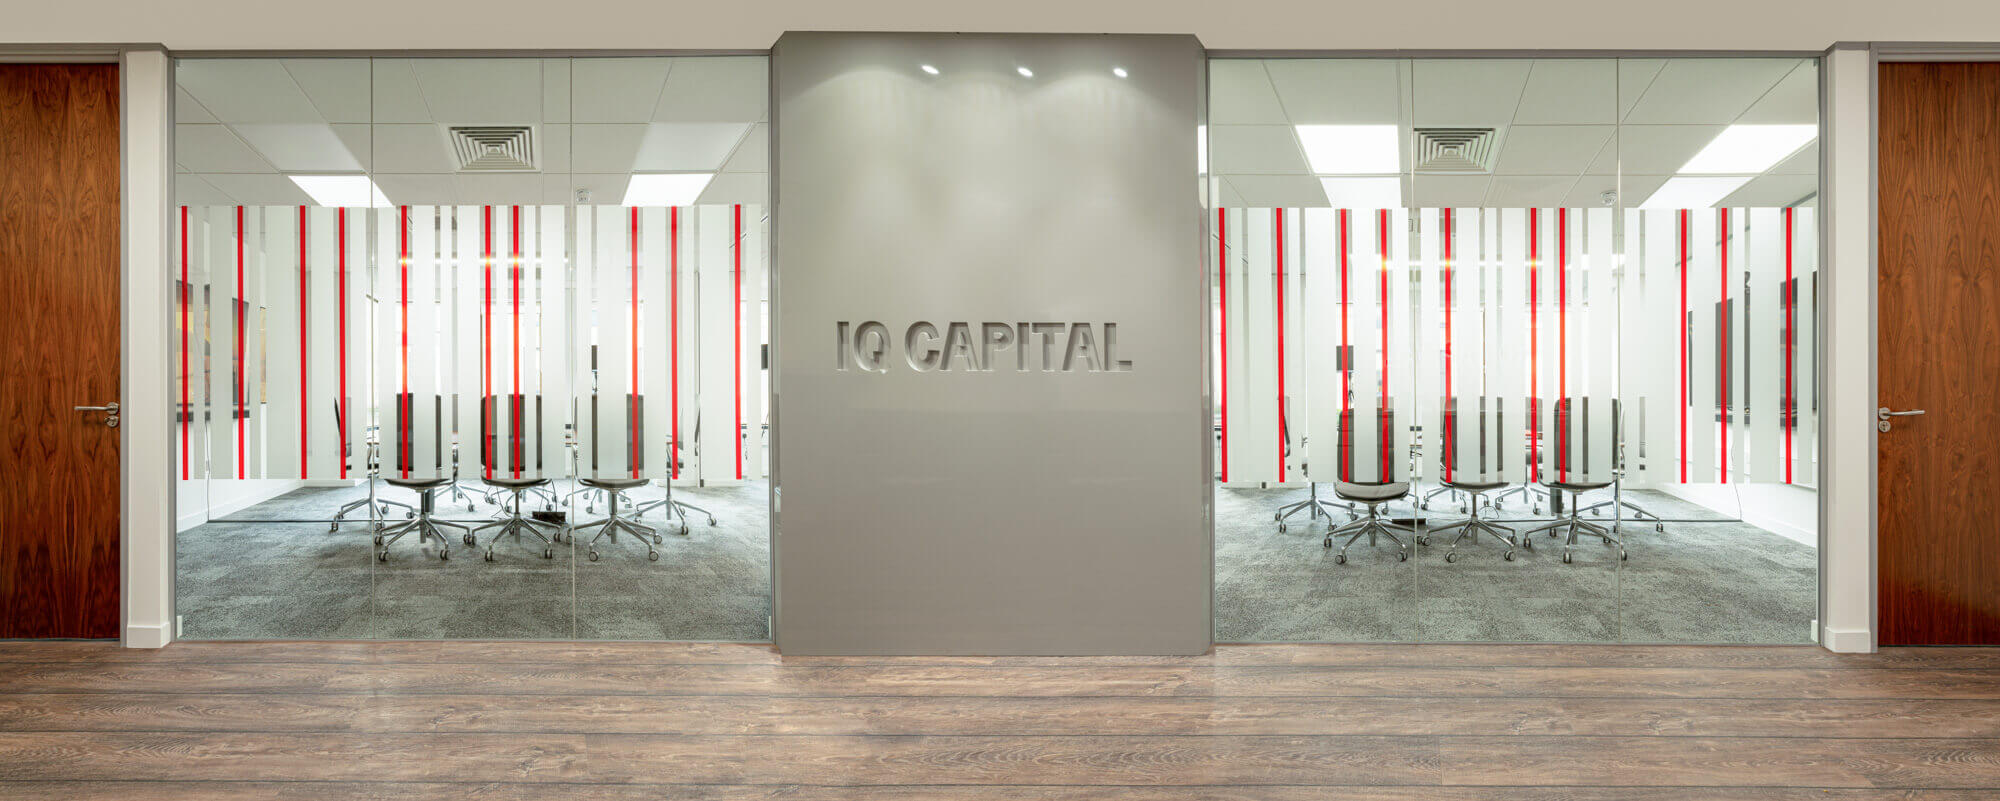 IQ Capital promotes two partners as it ramps up $400m investment in deep tech startups across UK and Europe.